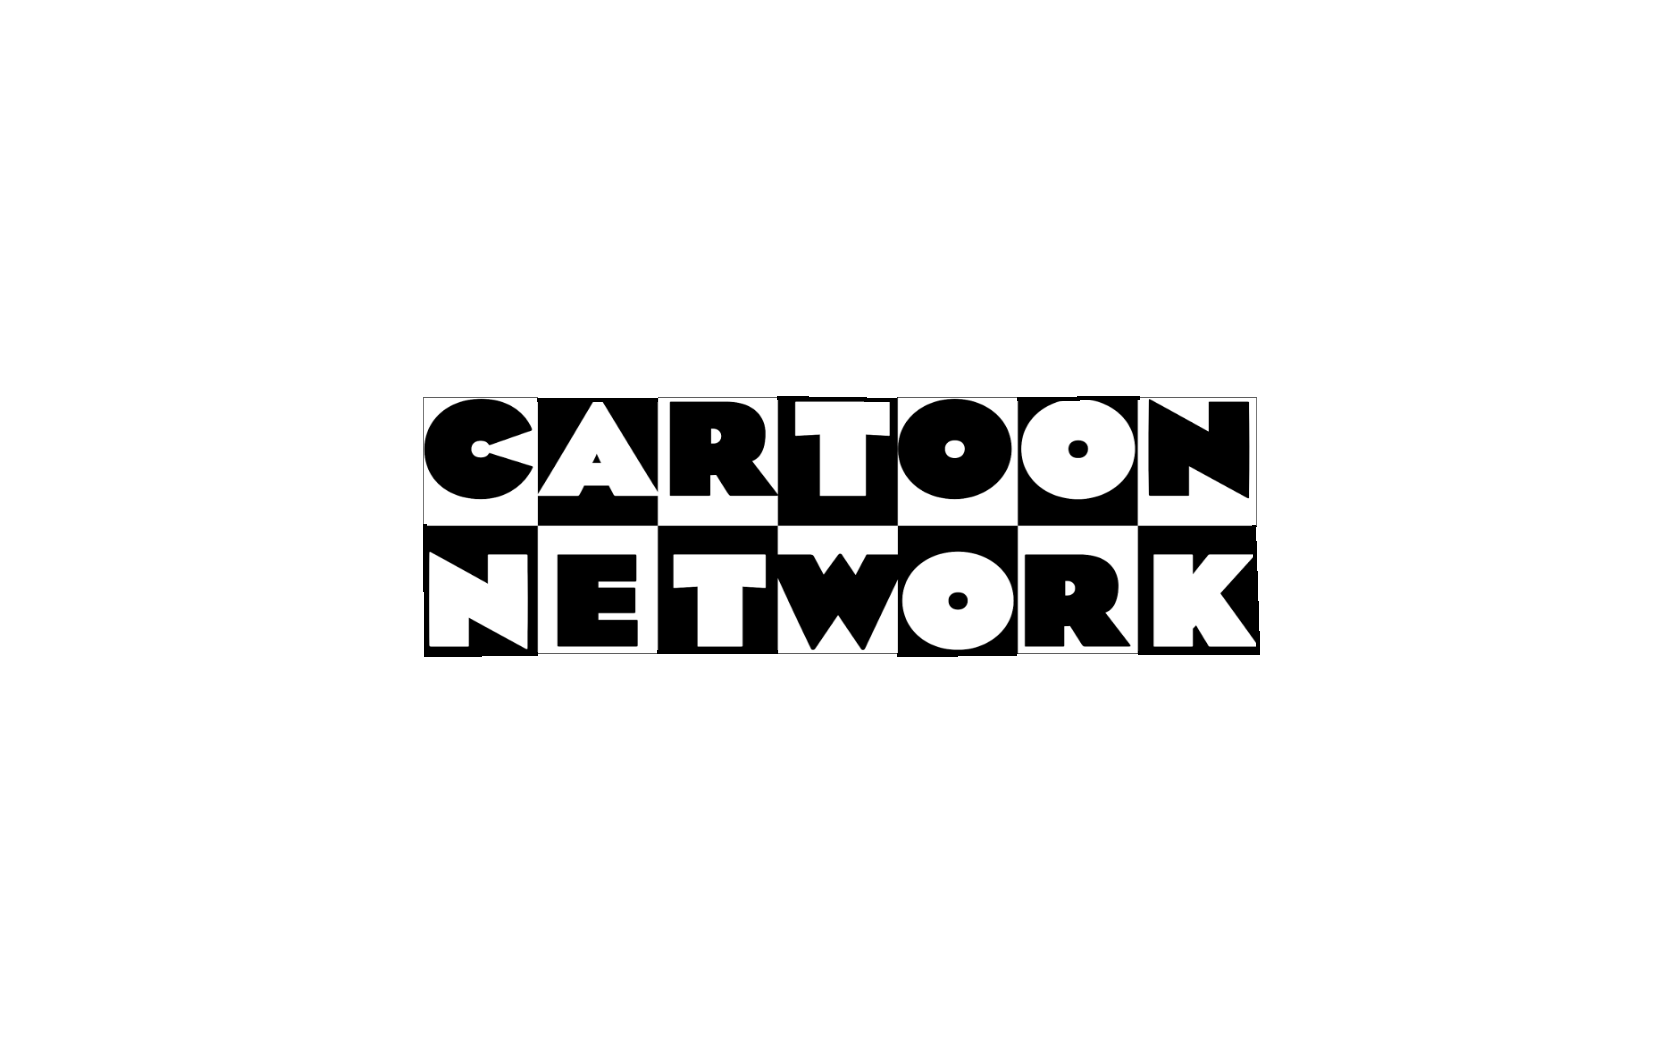 File:Cartoon Network white letter logo.png - Wikimedia Commons